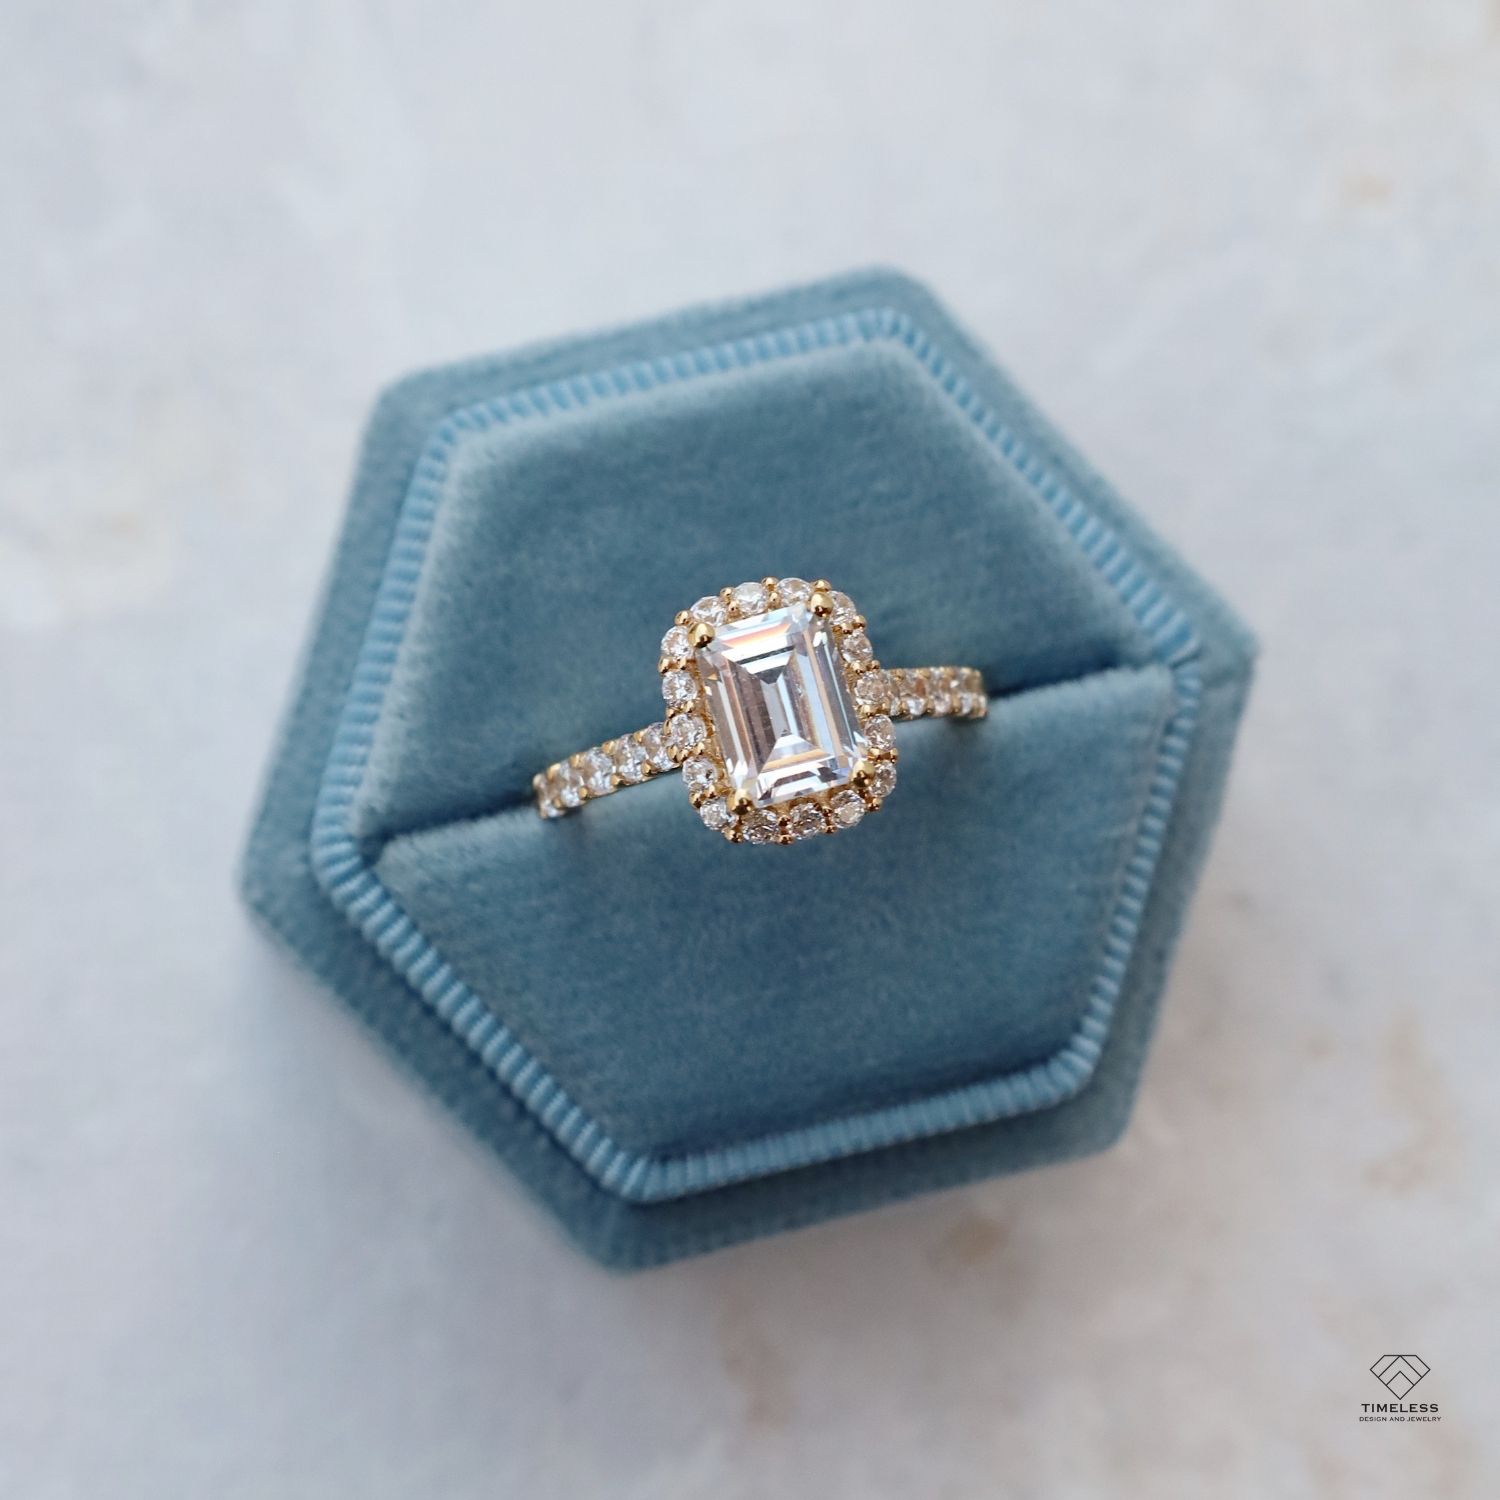 Custom Emerald Cut Diamond Engagement Ring in Salt Lake City by Timeless Design and Jewelry